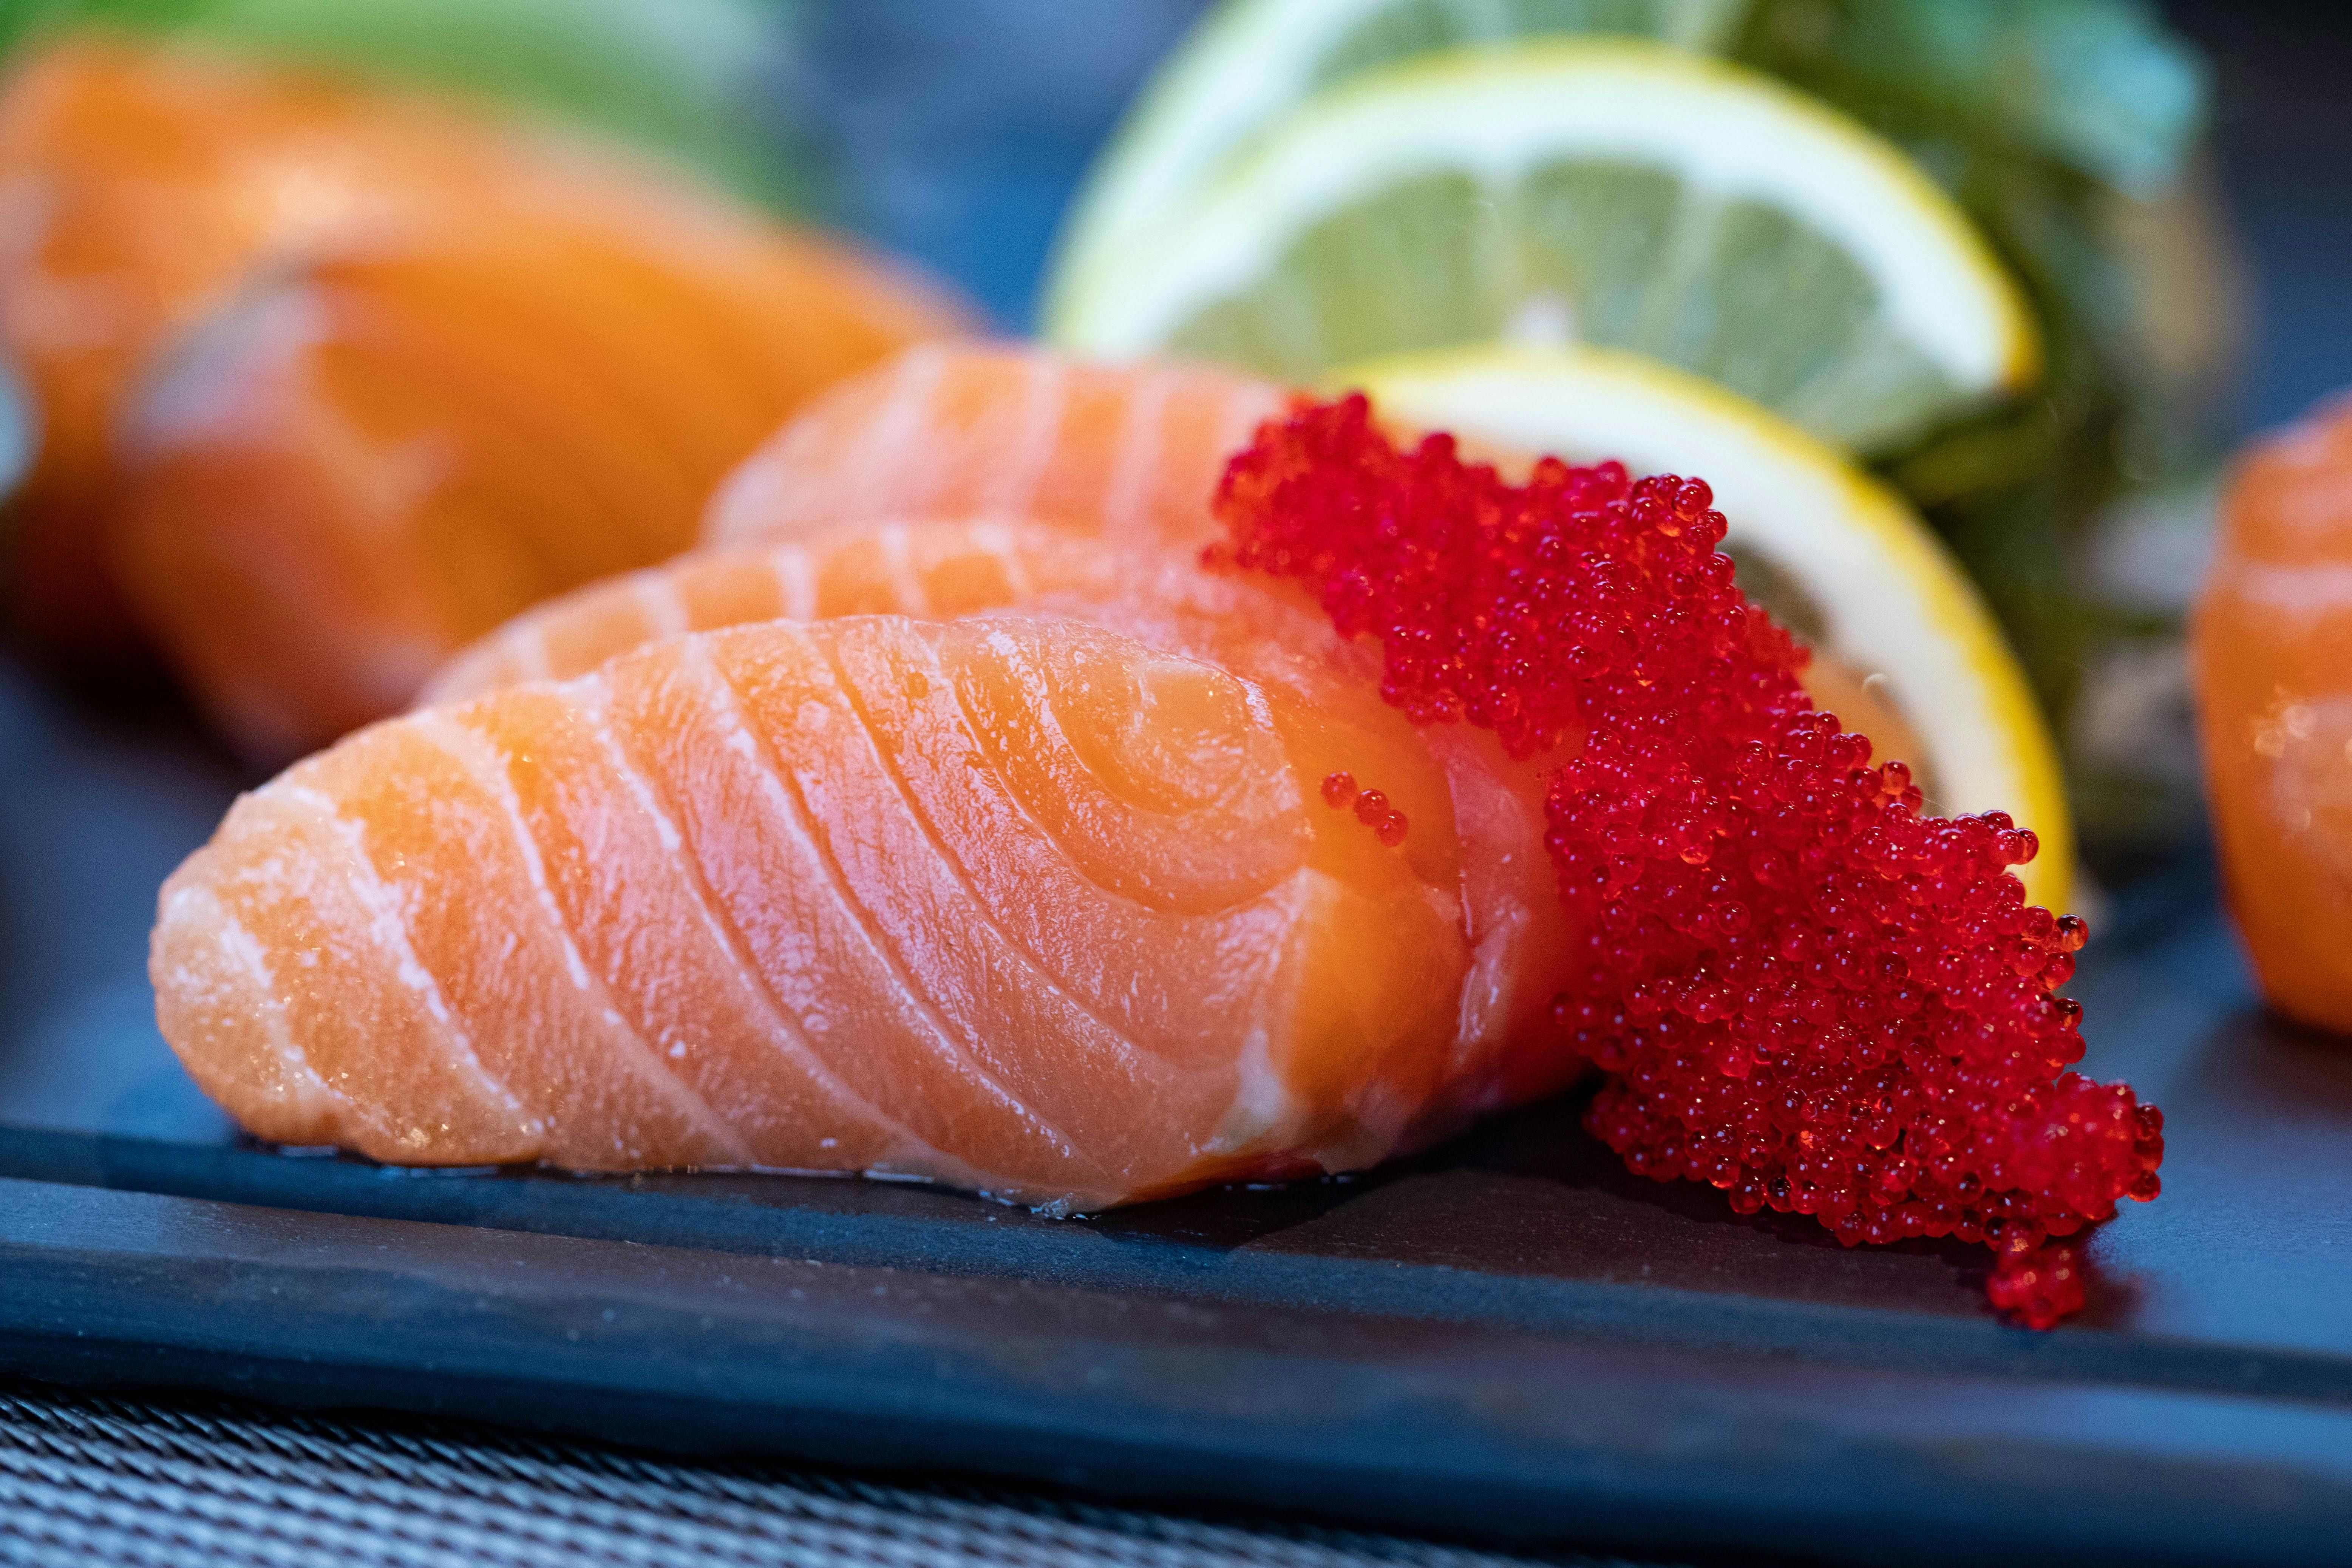 A perfectly cooked salmon fillet, rich in omega-3 fatty acids, served with a side of vegetables.